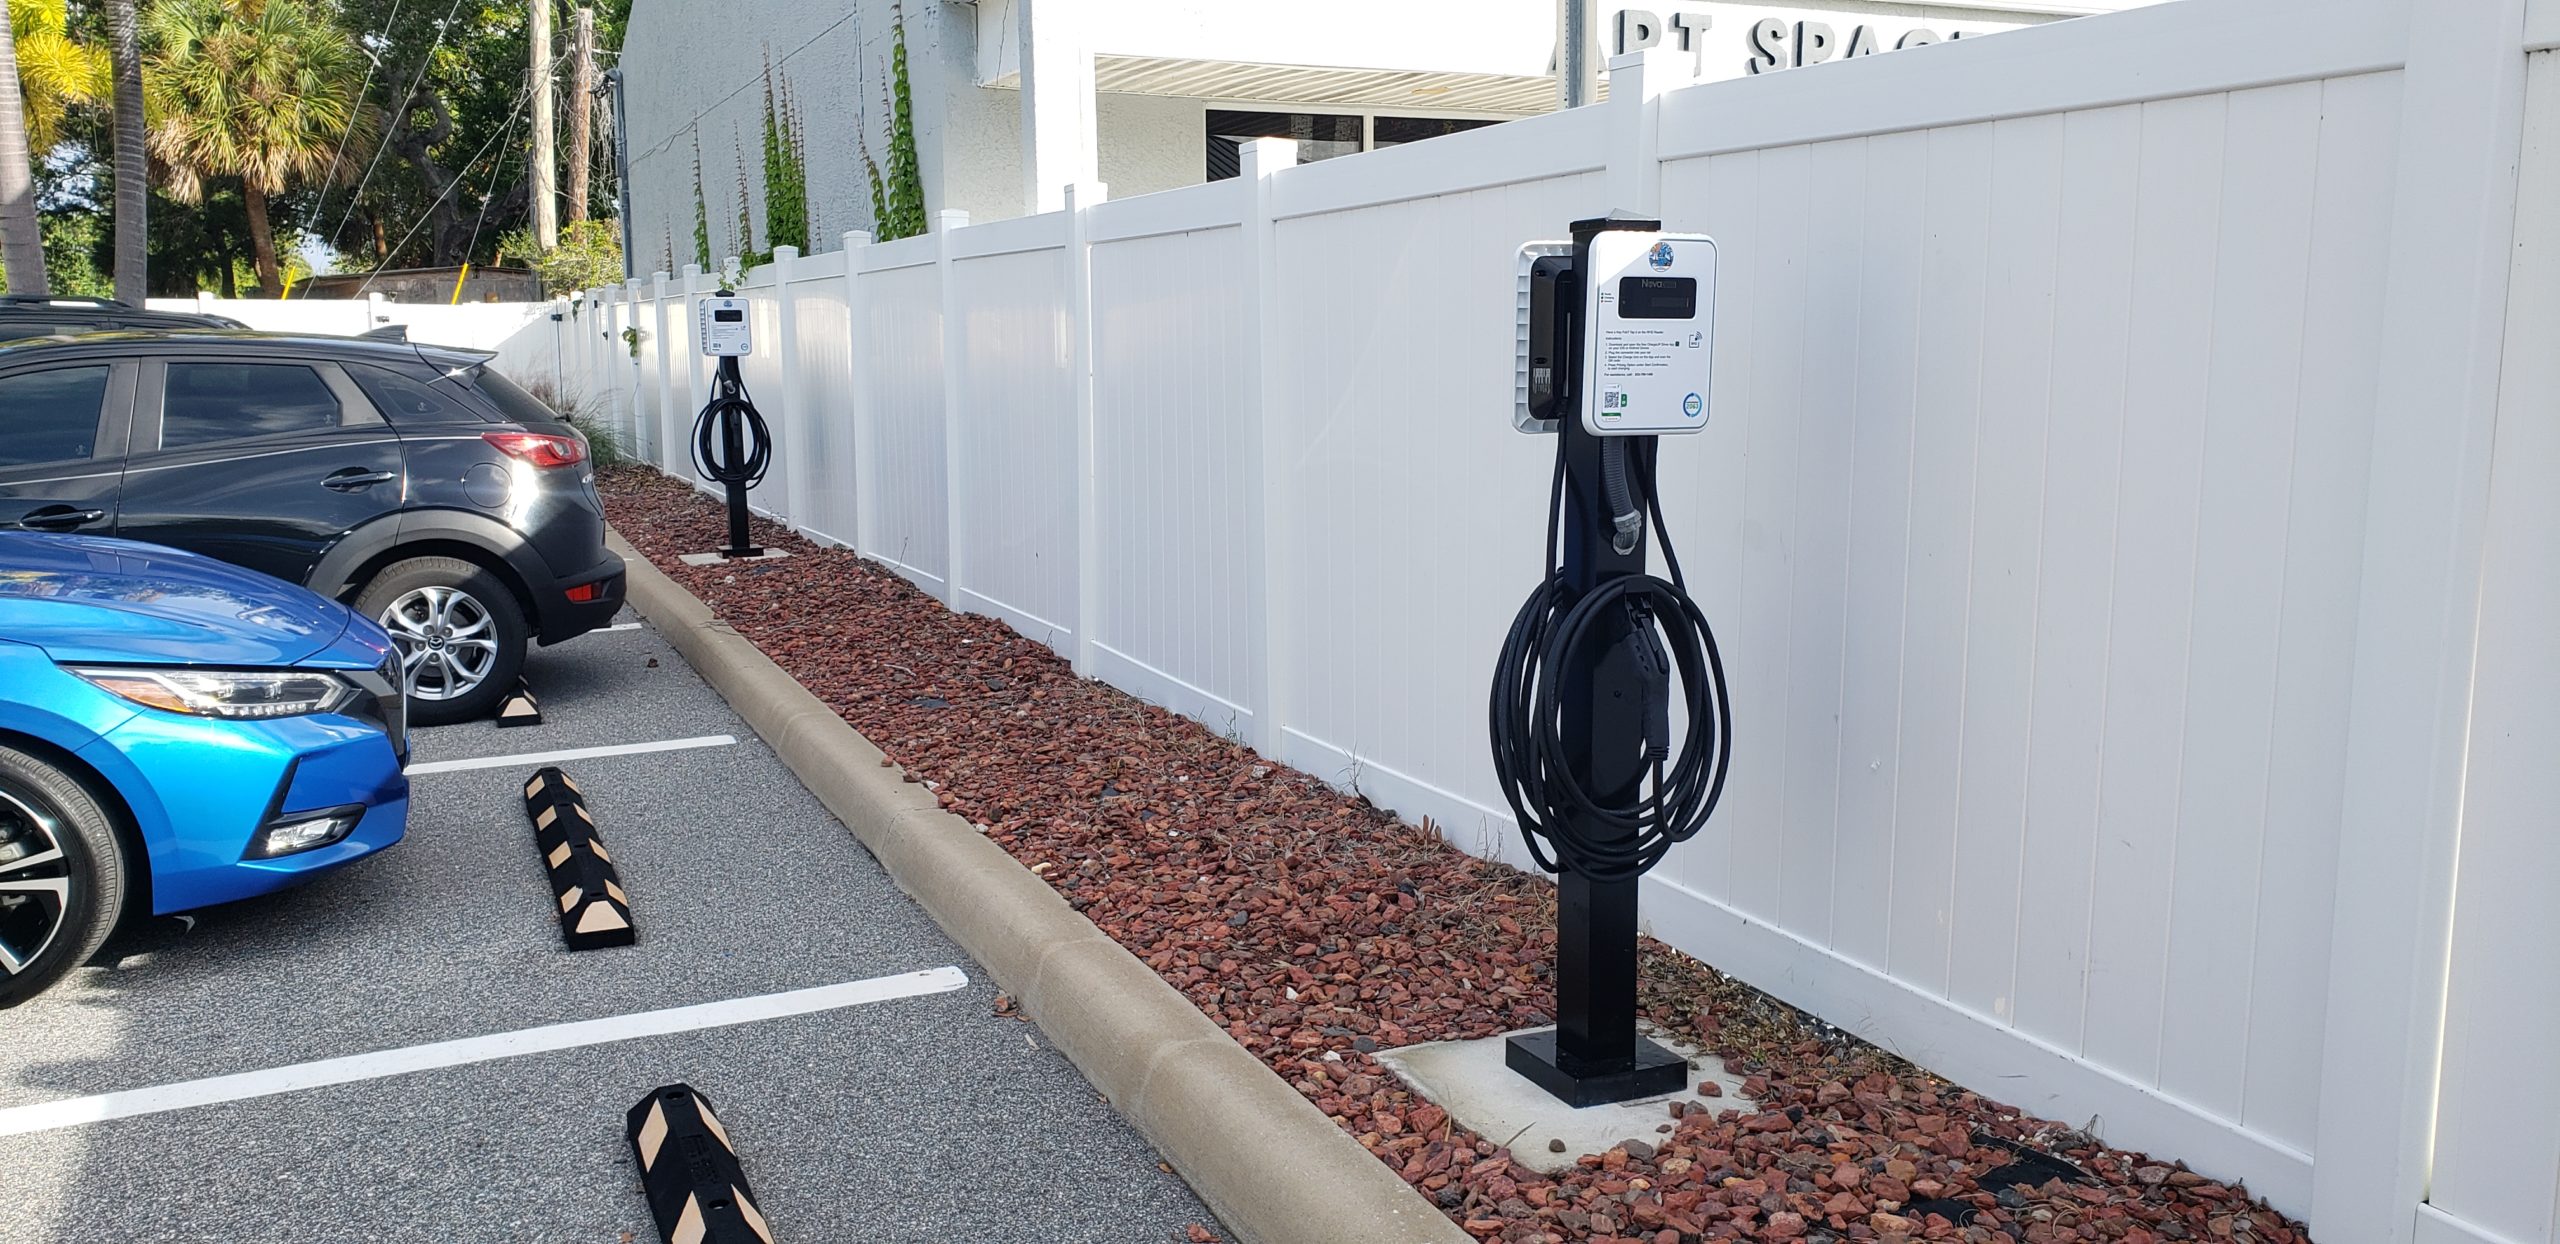 Two charging stations spaced apart with two parking spacing between them, with white plastic fence behind chargers. No cars are charging.